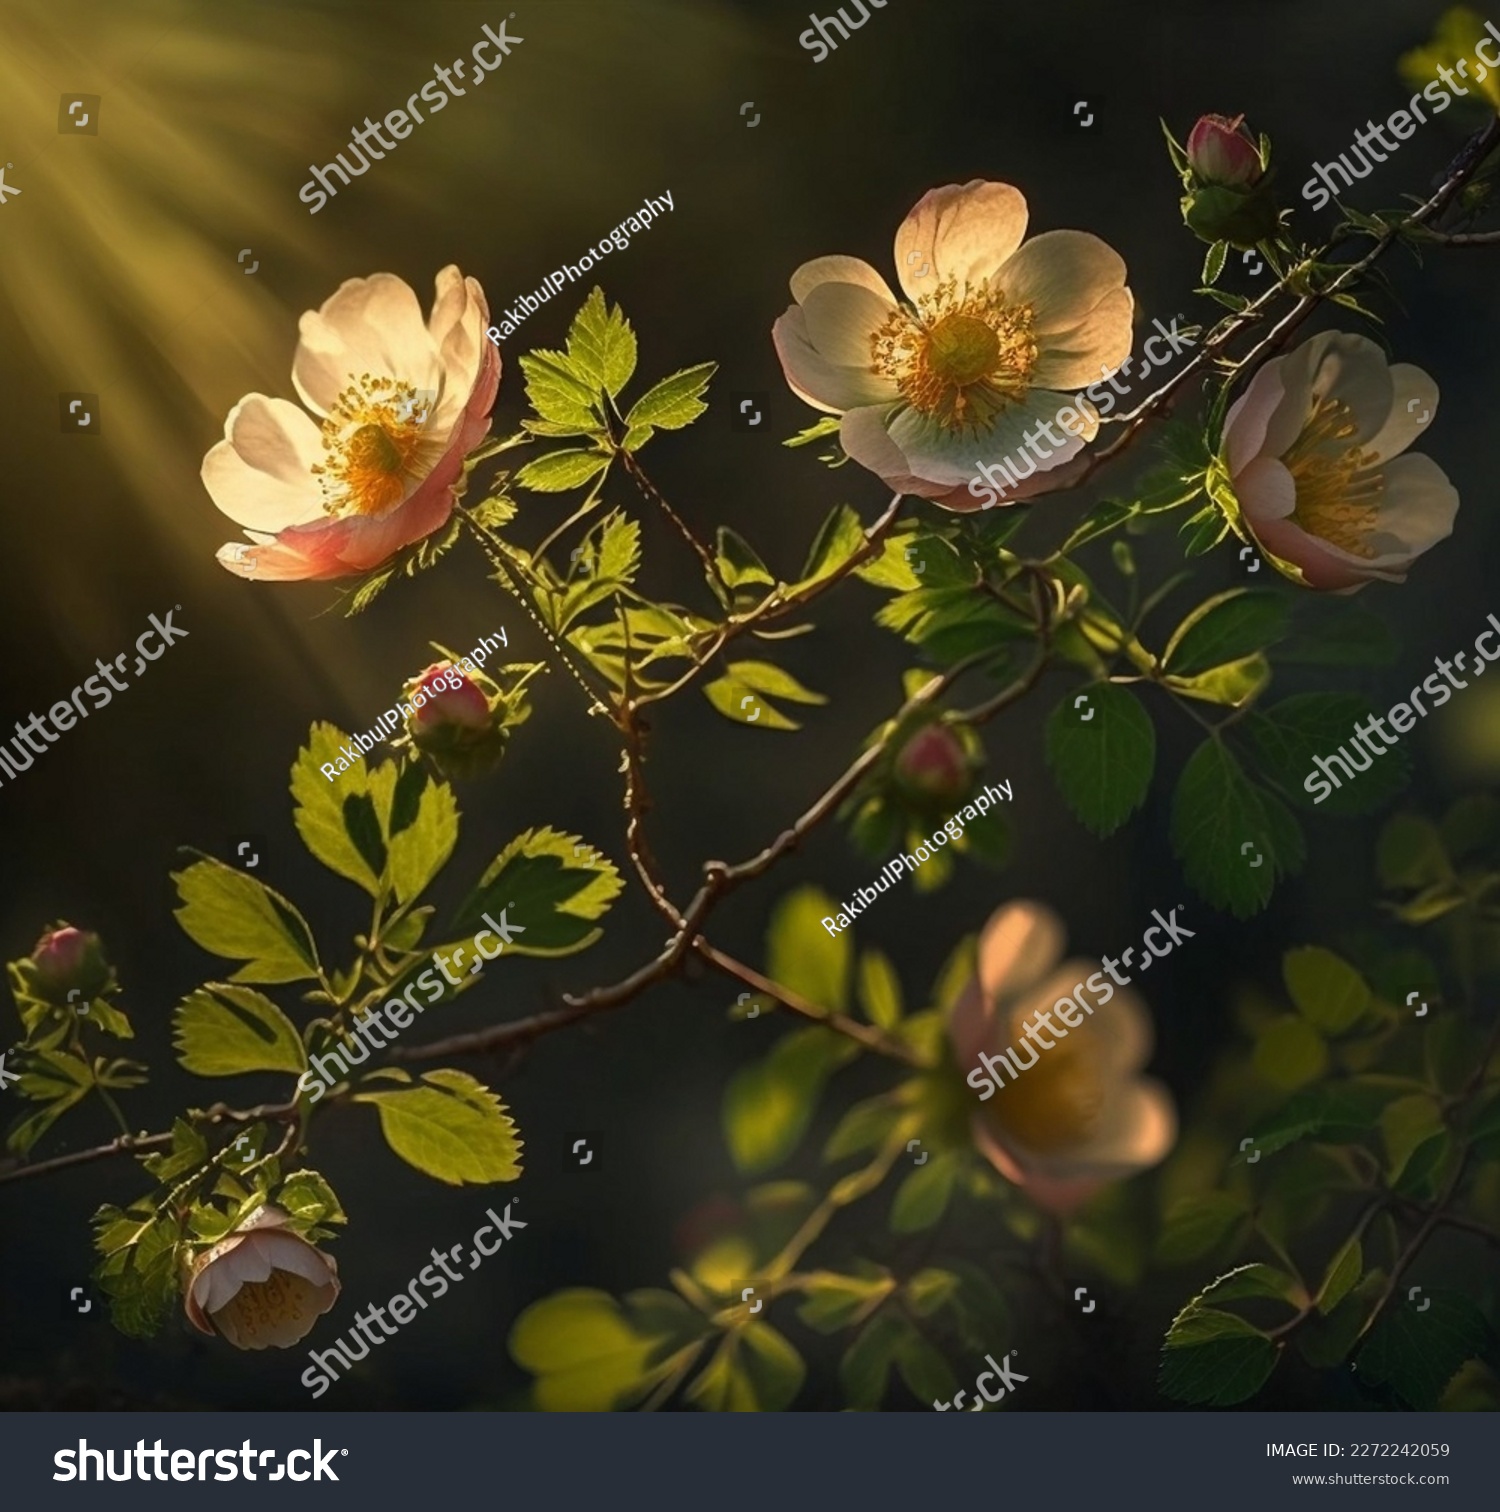 Dog rose (Rosa canina) and sweet briar rose (Rosa rubiginosa) are spiny perennial shrubs that form dense impenetrable thickets. Both are highly unpalatable #2272242059